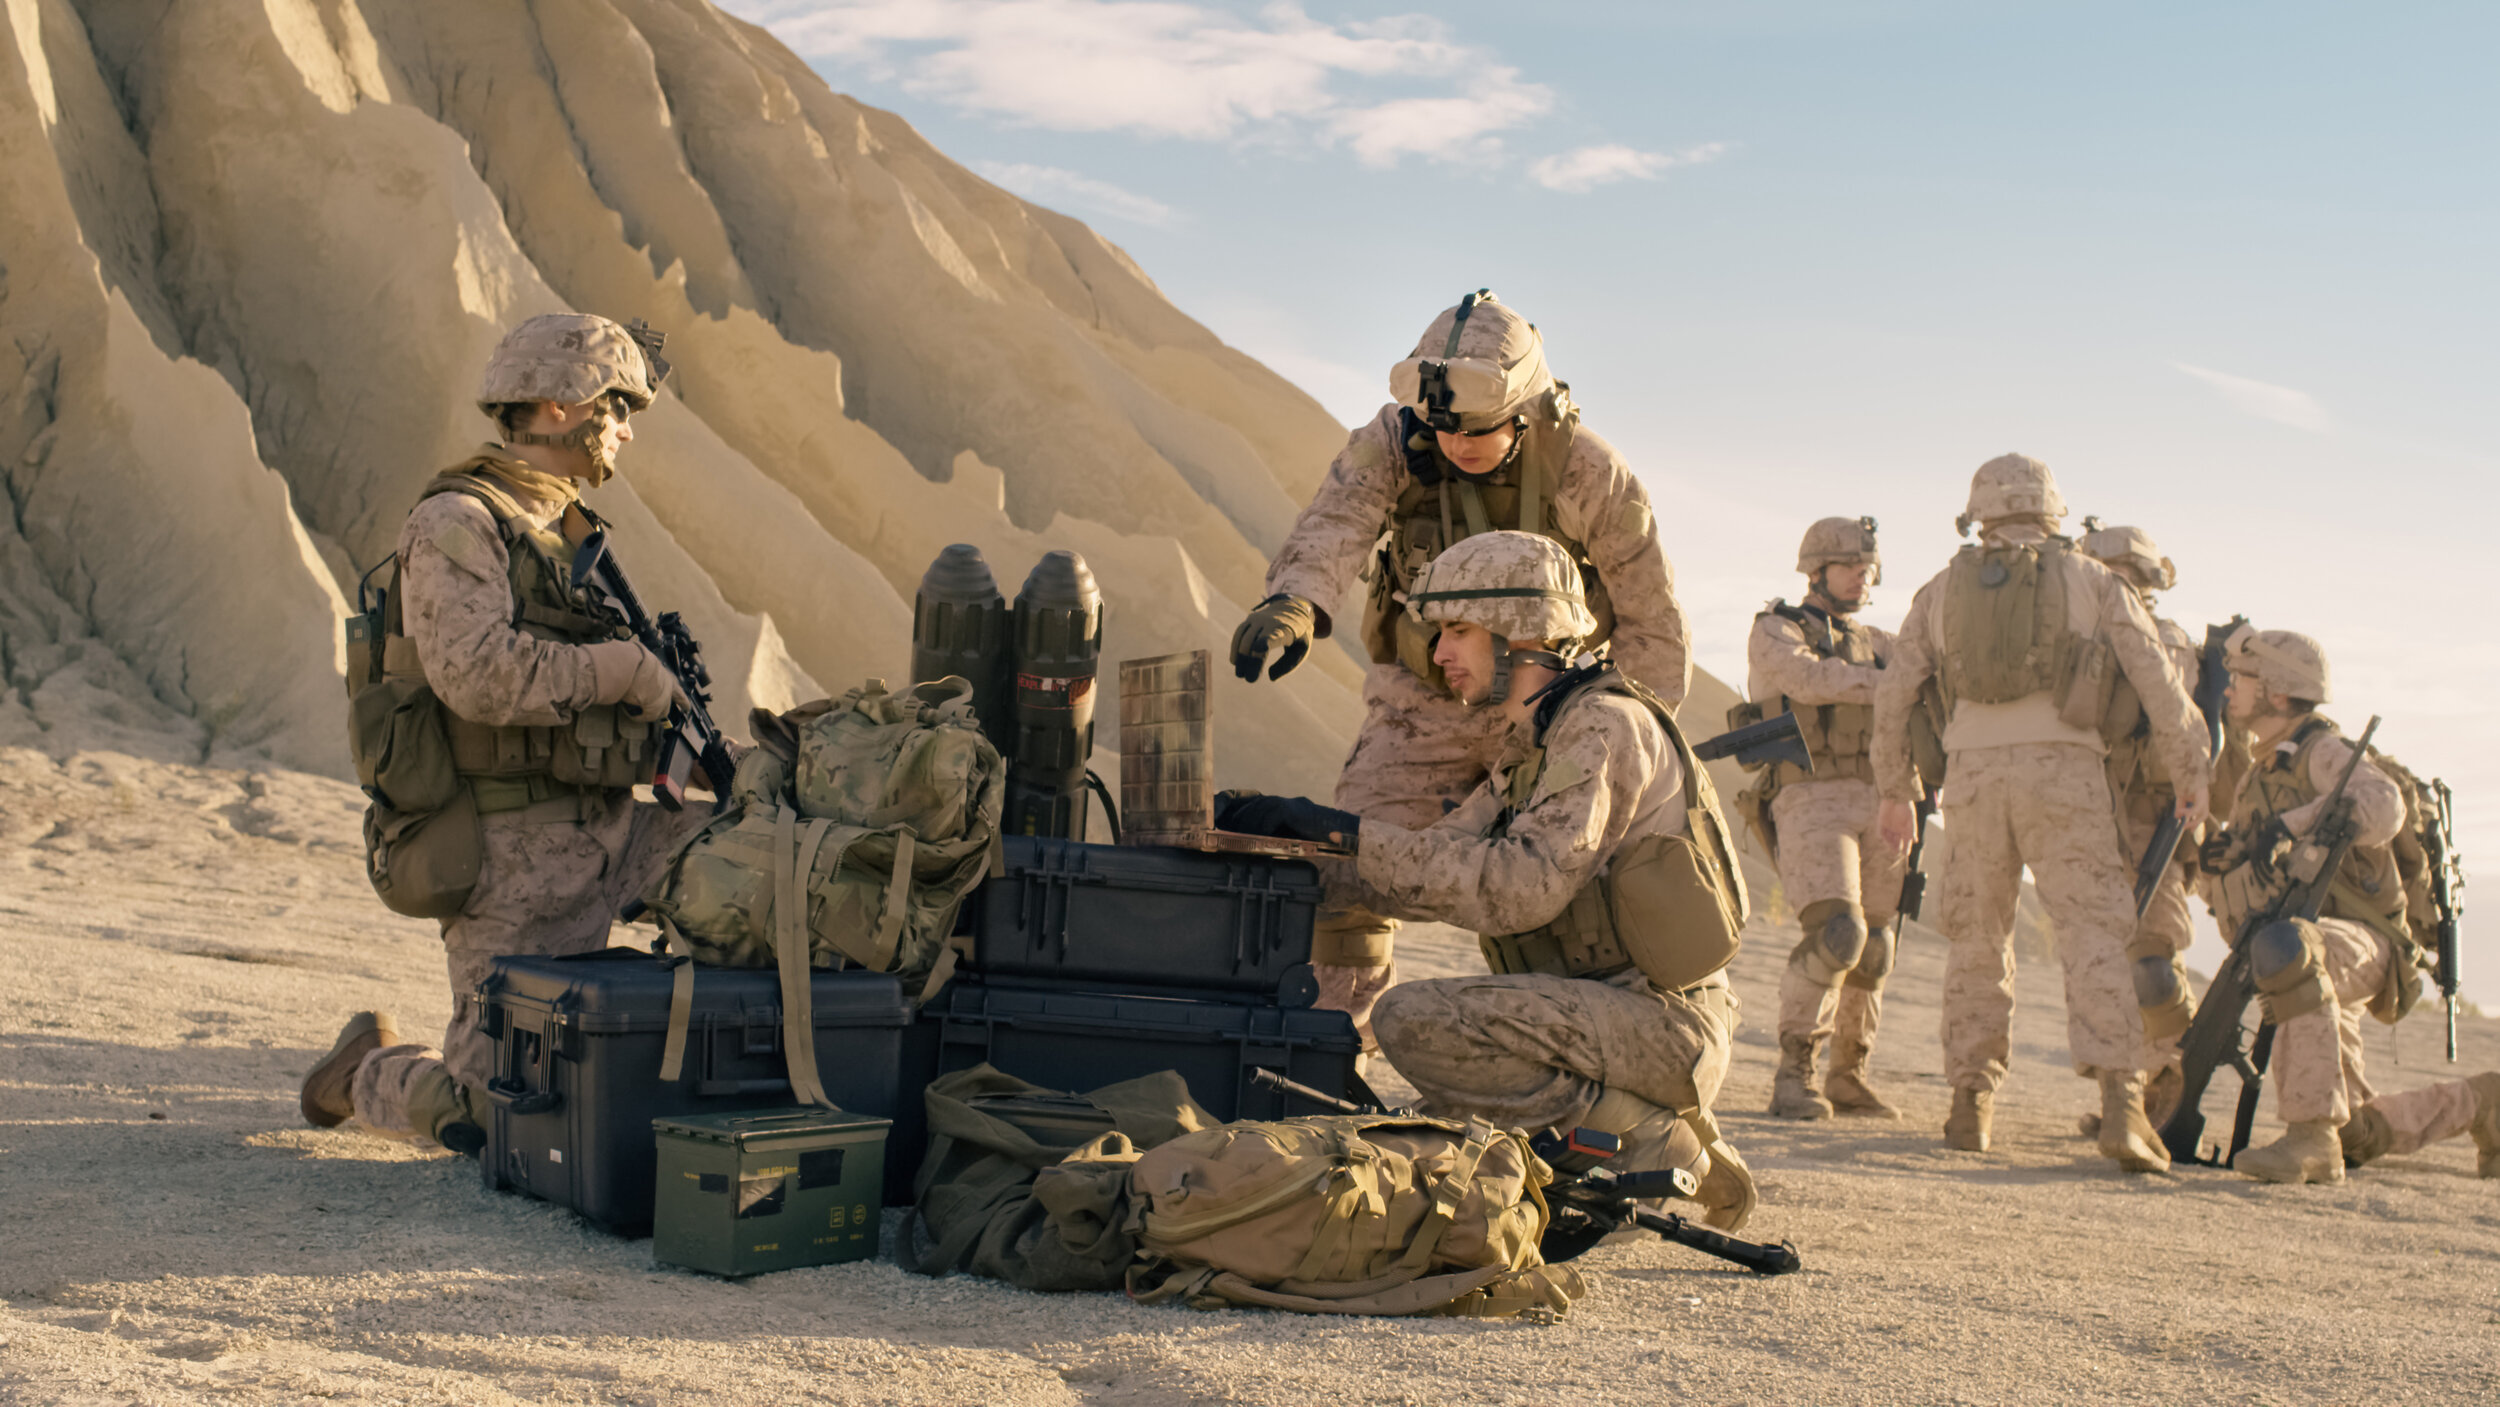 Soldiers-are-Using-Laptop-Computer-for-Surveillance-During-Military-Operation-in-the-Desert.-814367260_5000x2813.jpeg